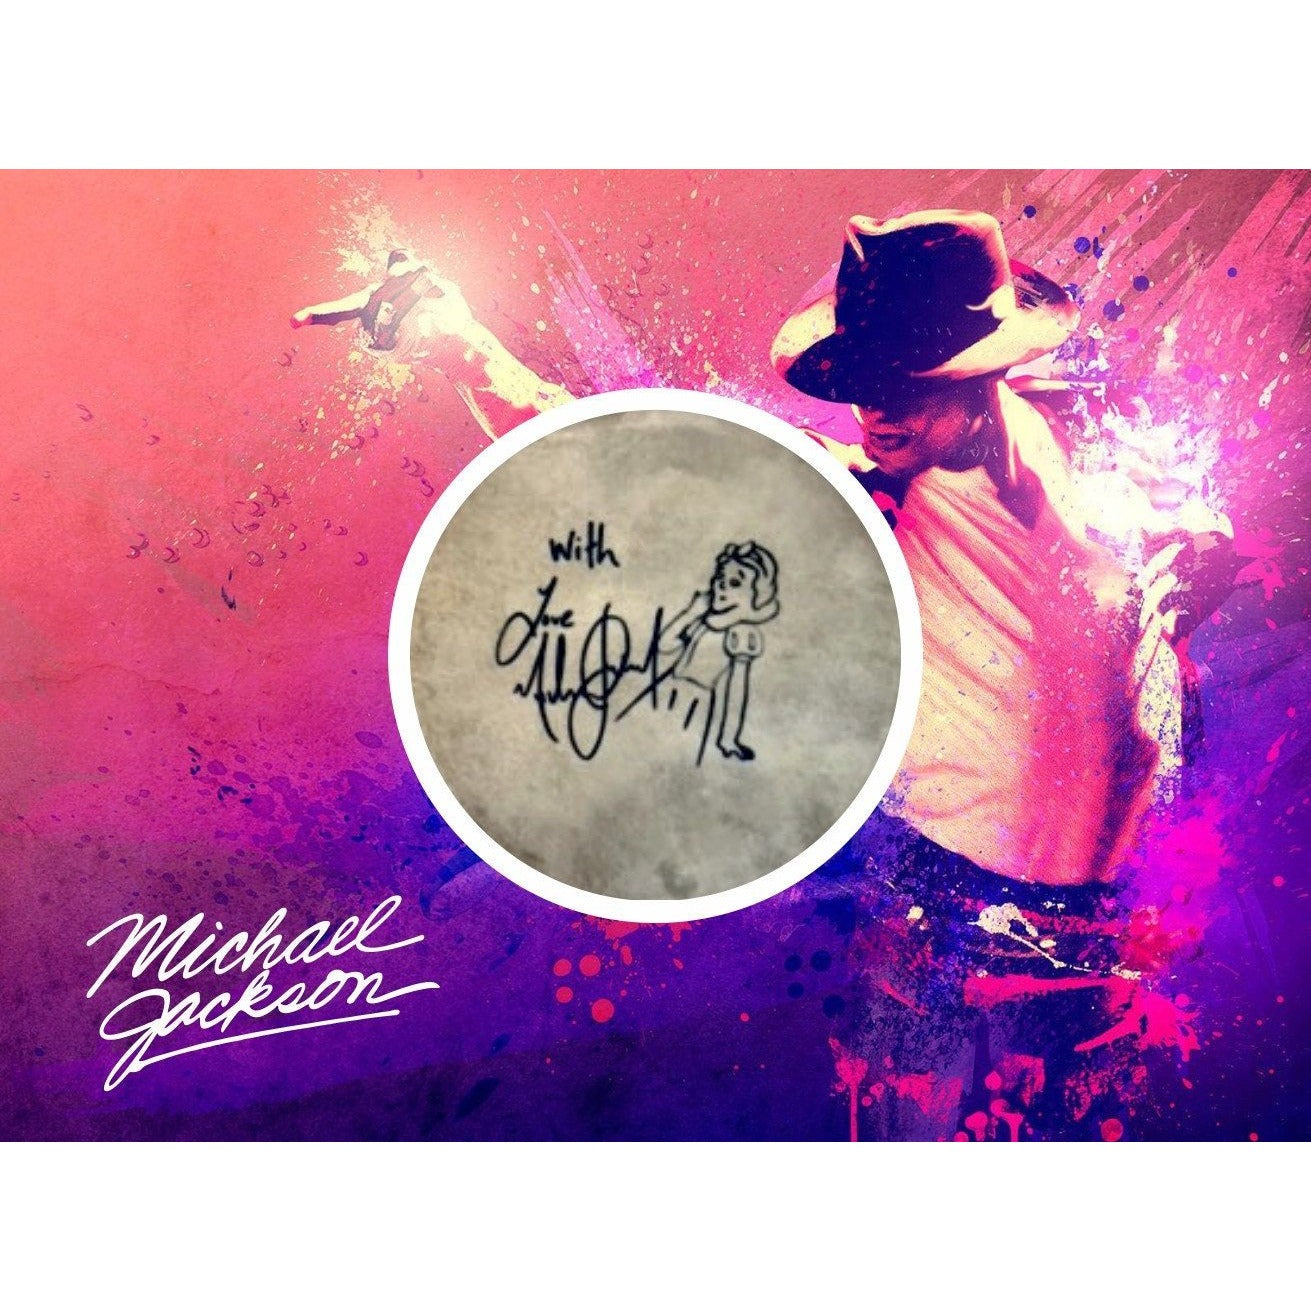 Michael Jackson signed and sketch drawing 10-inch tambourine signed with proof